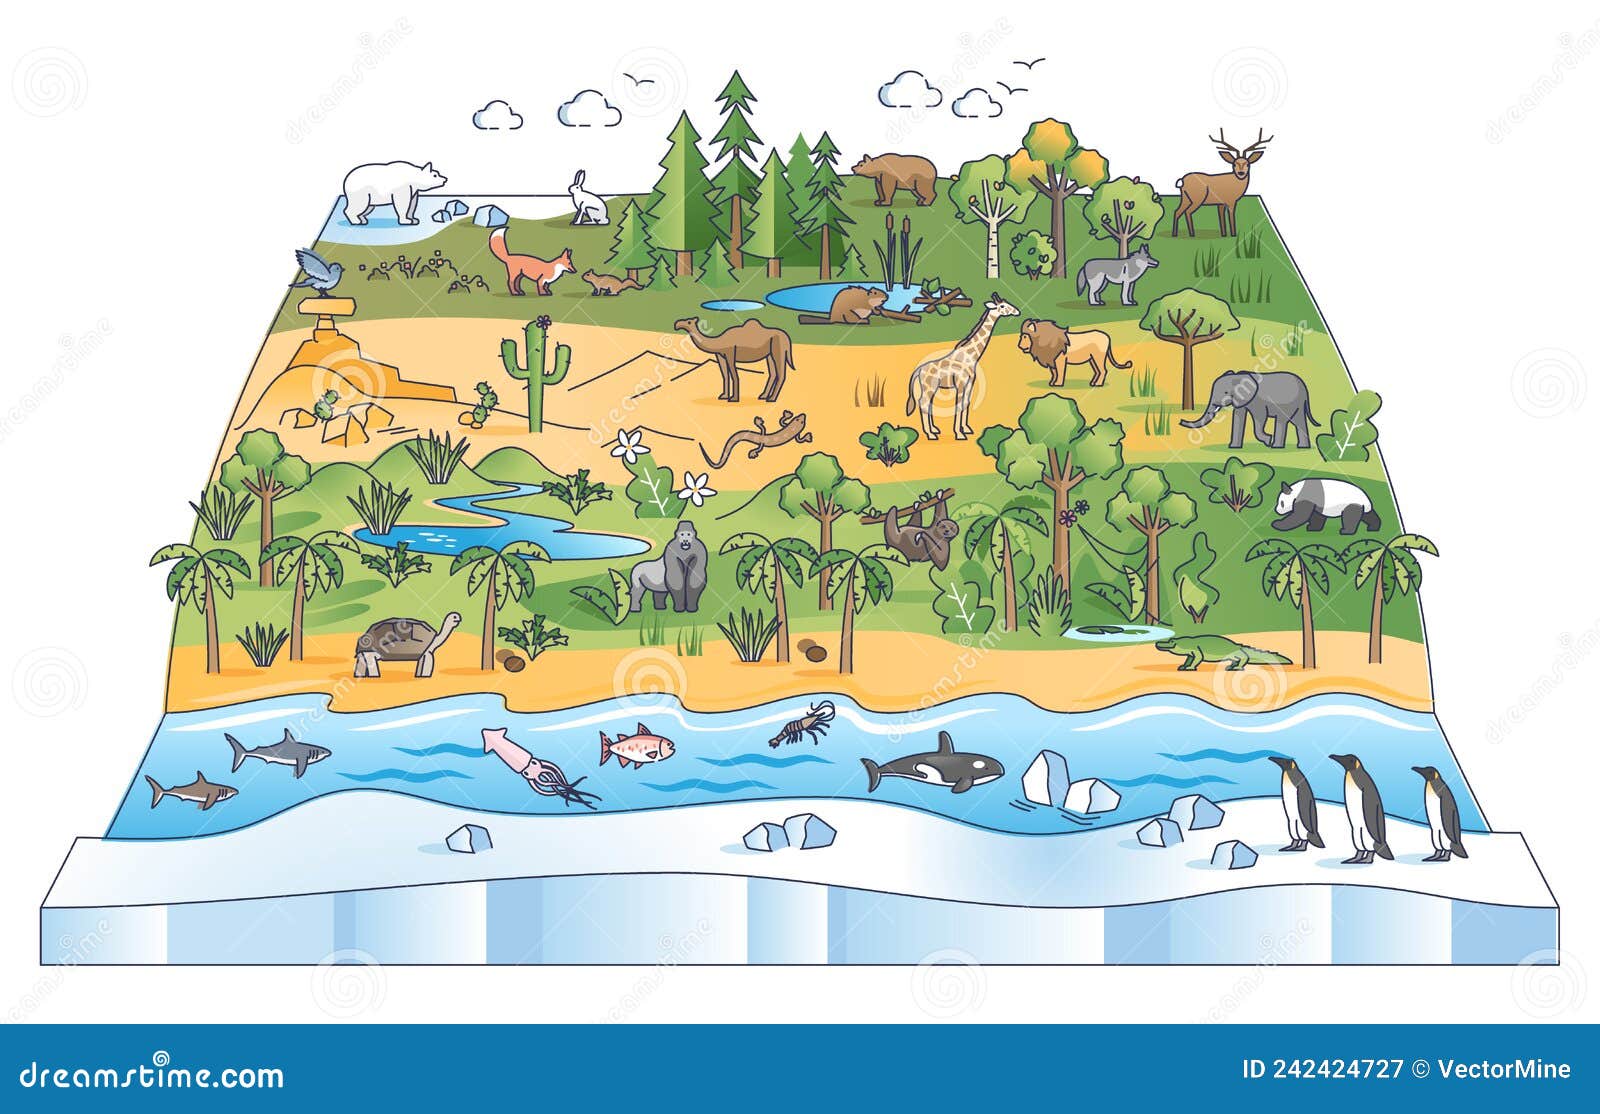 biodiversity scene with flora and fauna ecological zones outline diagram